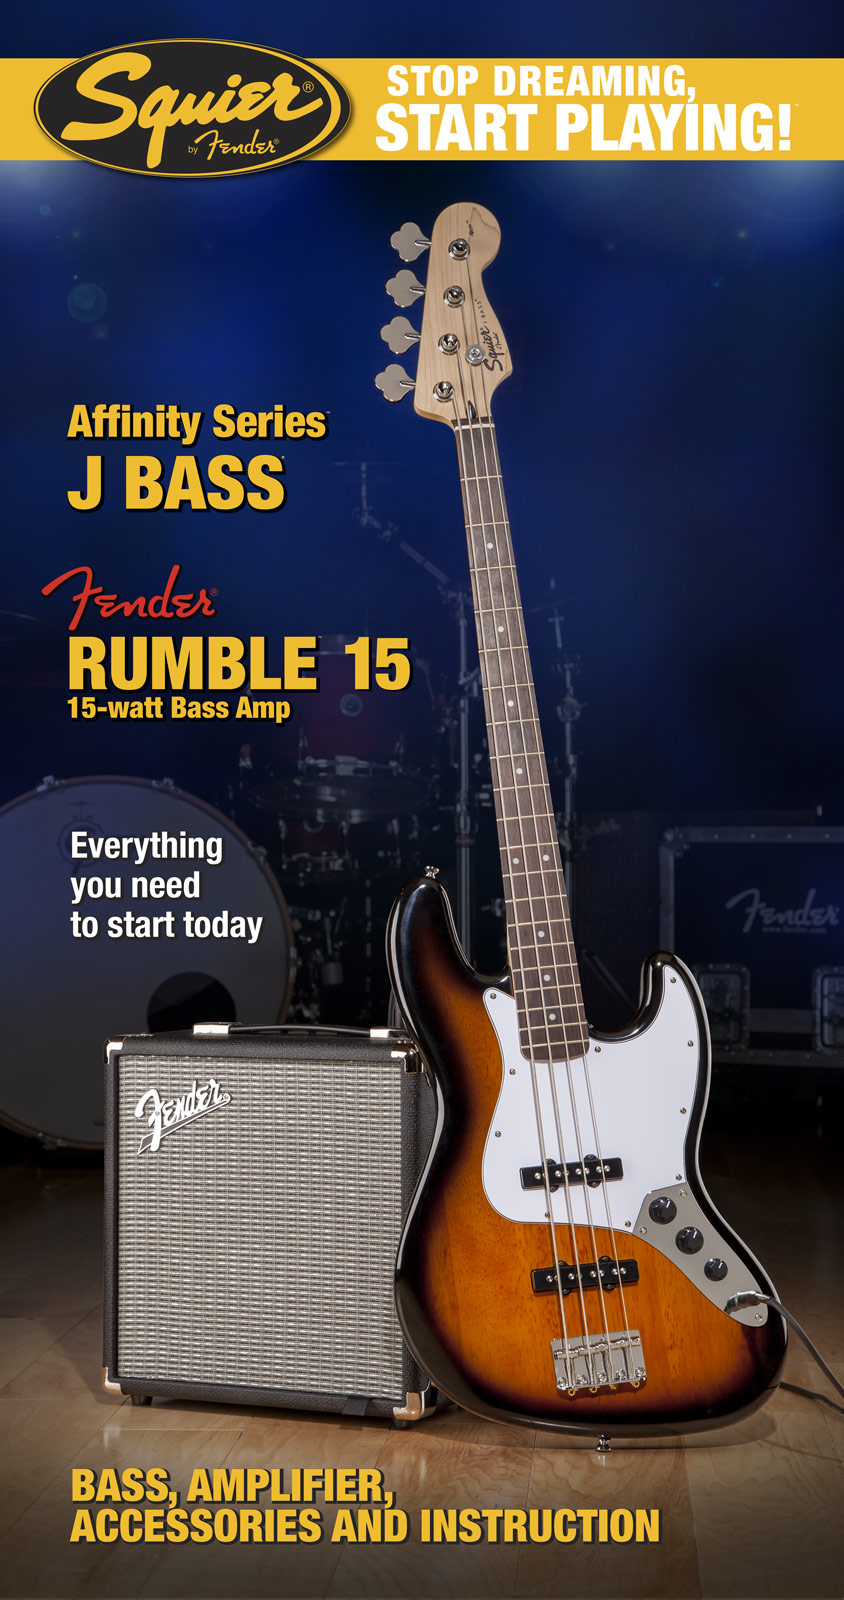 Squier Jazz Bass Affinity With Fender Rumble 15 Set - Pack bajo eléctrico - Variation 1